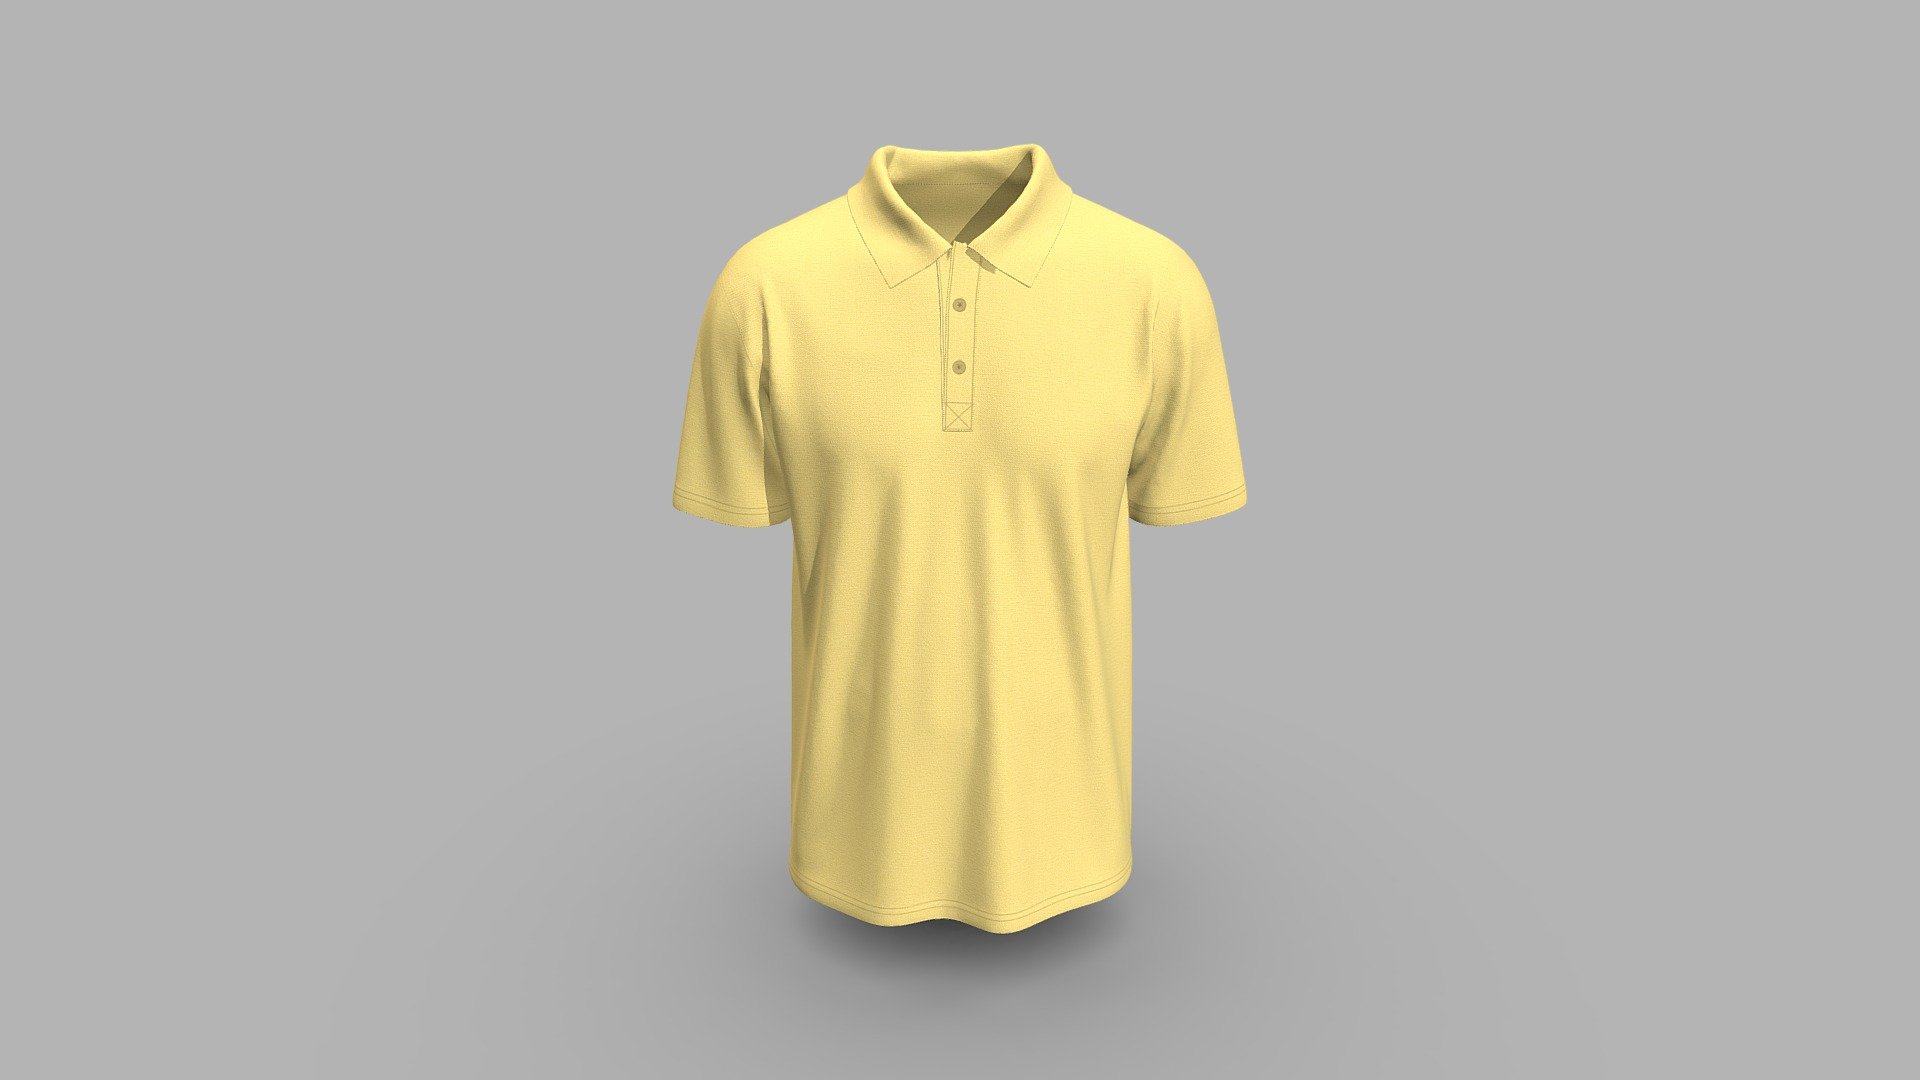 Cloth Title = Premium Polo Design 

SKU = DG100146 

Category = Unisex 

Product Type = Polo 

Cloth Length = Regular 

Body Fit = Regular Fit 

Occasion = Casual  

Sleeve Style = Set In Sleeve 


Our Services:

3D Apparel Design.

OBJ,FBX,GLTF Making with High/Low Poly.

Fabric Digitalization.

Mockup making.

3D Teck Pack.

Pattern Making.

2D Illustration.

Cloth Animation and 360 Spin Video.


Contact us:- 

Email: info@digitalfashionwear.com 

Website: https://digitalfashionwear.com 


We designed all the types of cloth specially focused on product visualization, e-commerce, fitting, and production. 

We will design: 

T-shirts 

Polo shirts 

Hoodies 

Sweatshirt 

Jackets 

Shirts 

TankTops 

Trousers 

Bras 

Underwear 

Blazer 

Aprons 

Leggings 

and All Fashion items. 





Our goal is to make sure what we provide you, meets your demand 3d model